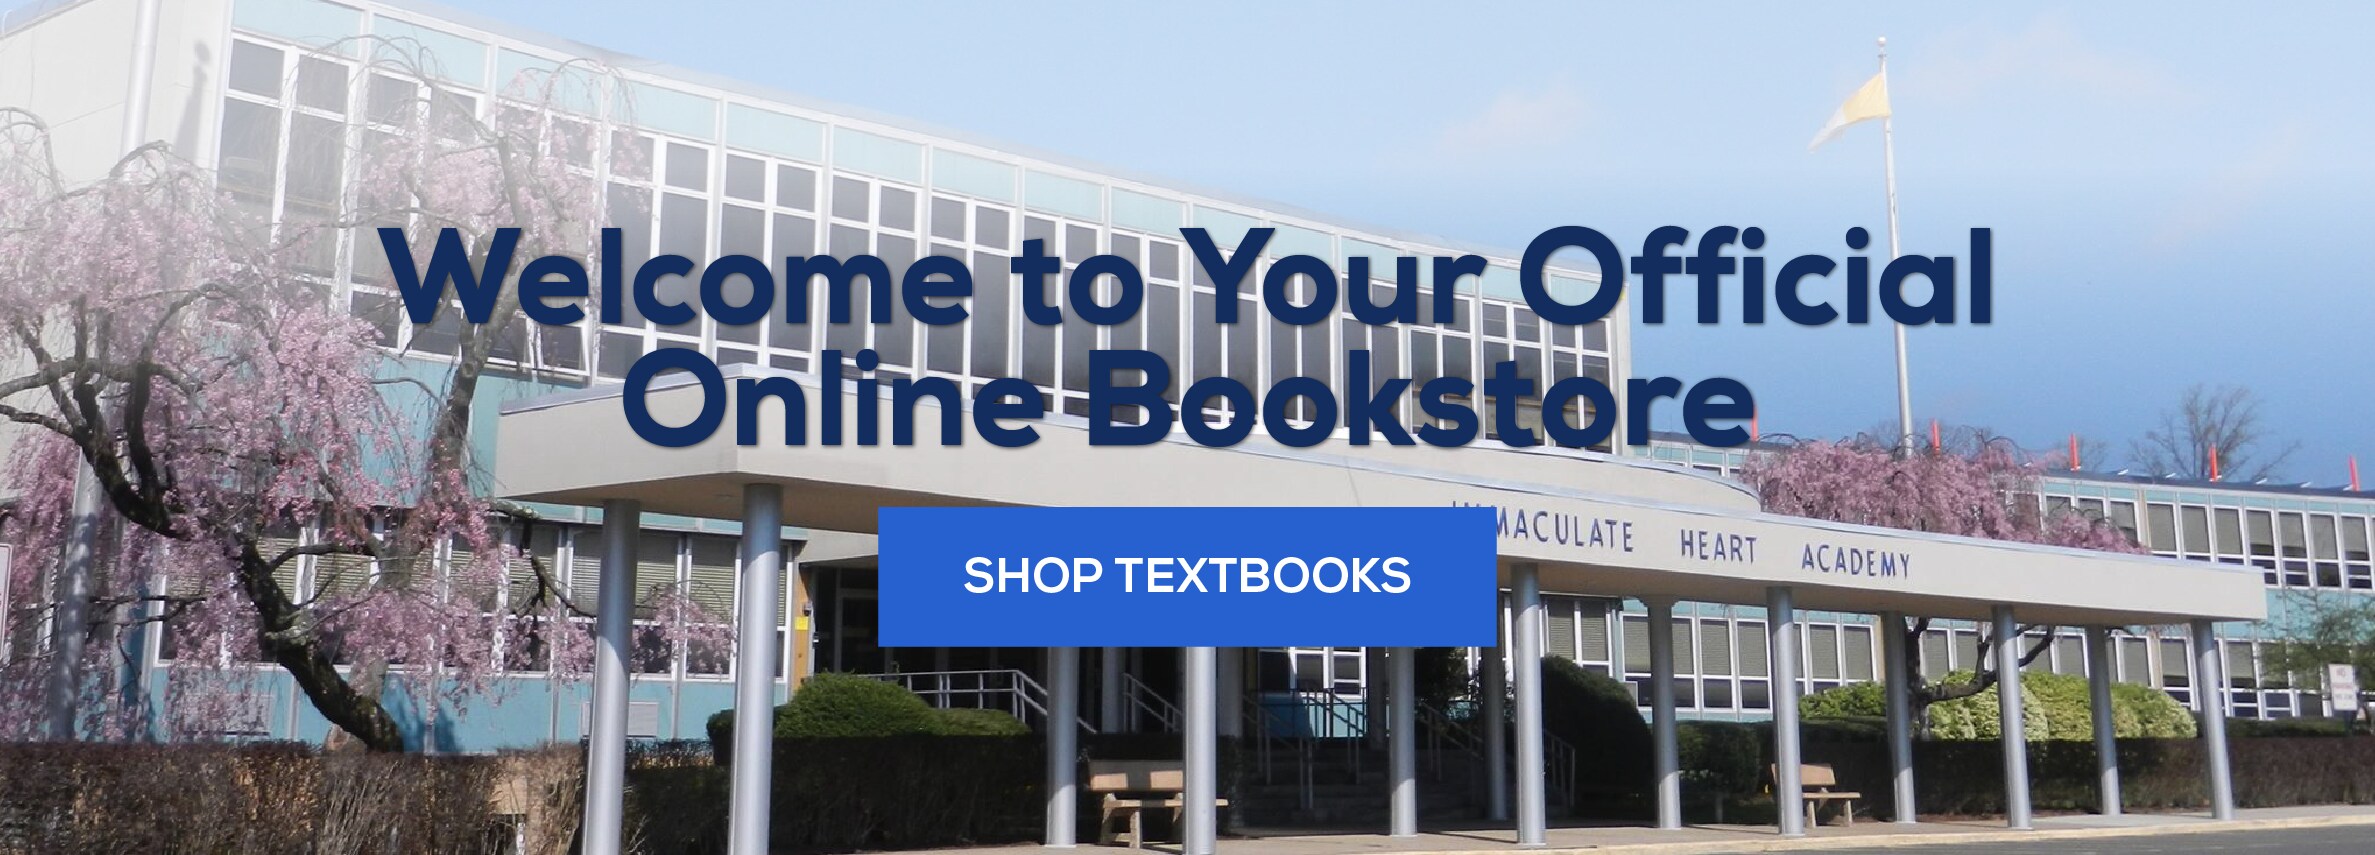 Welcome to your official Online bookstore. shop textbooks